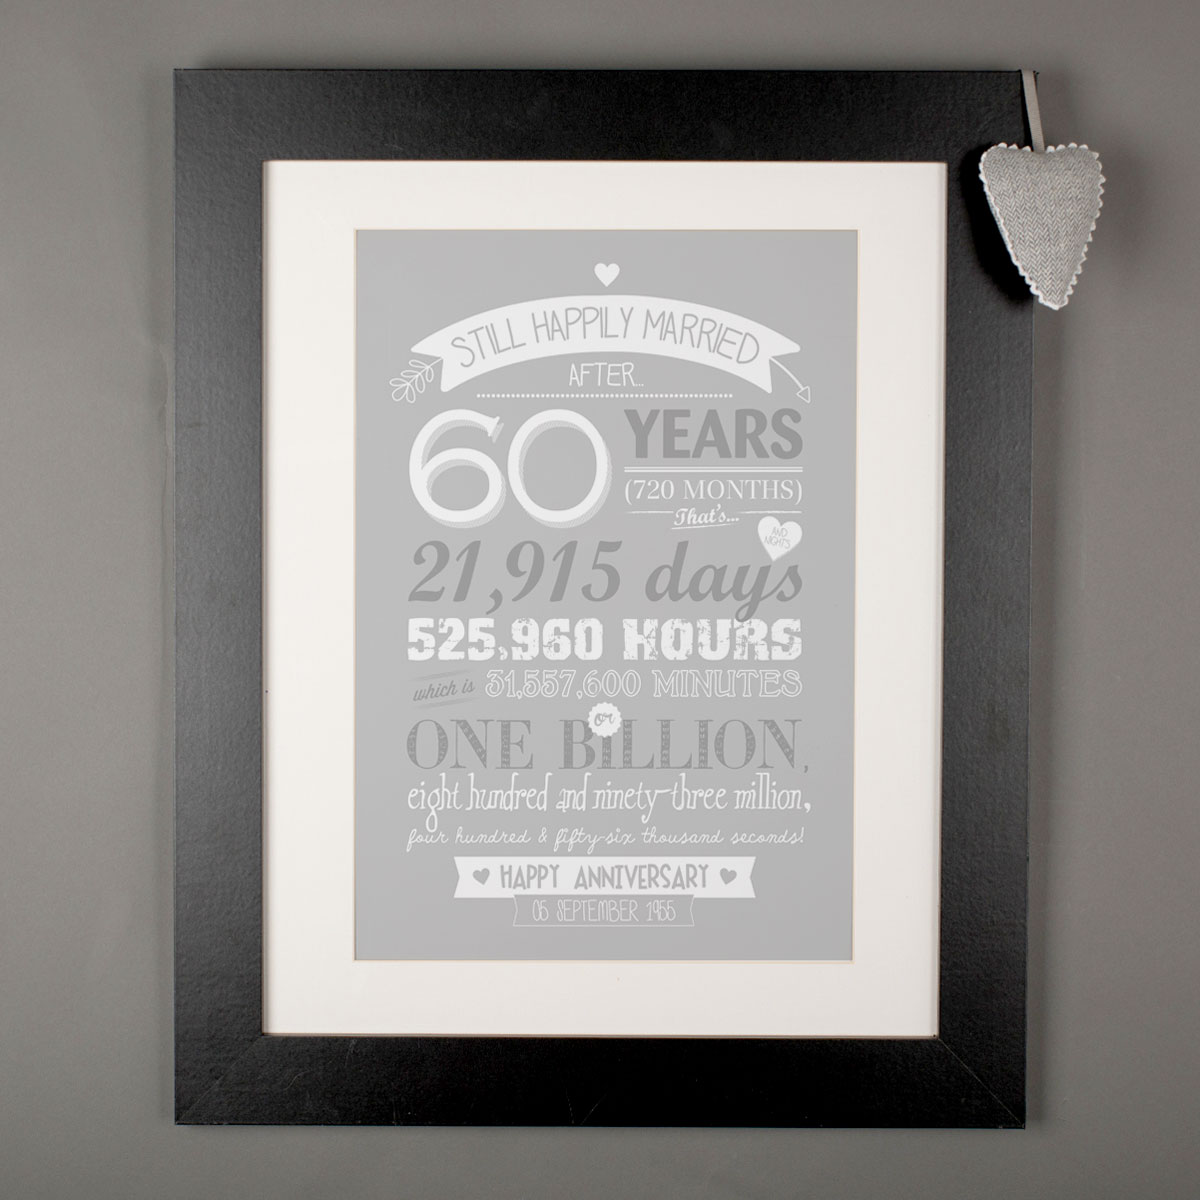 Personalised Framed Print - After 60 Years